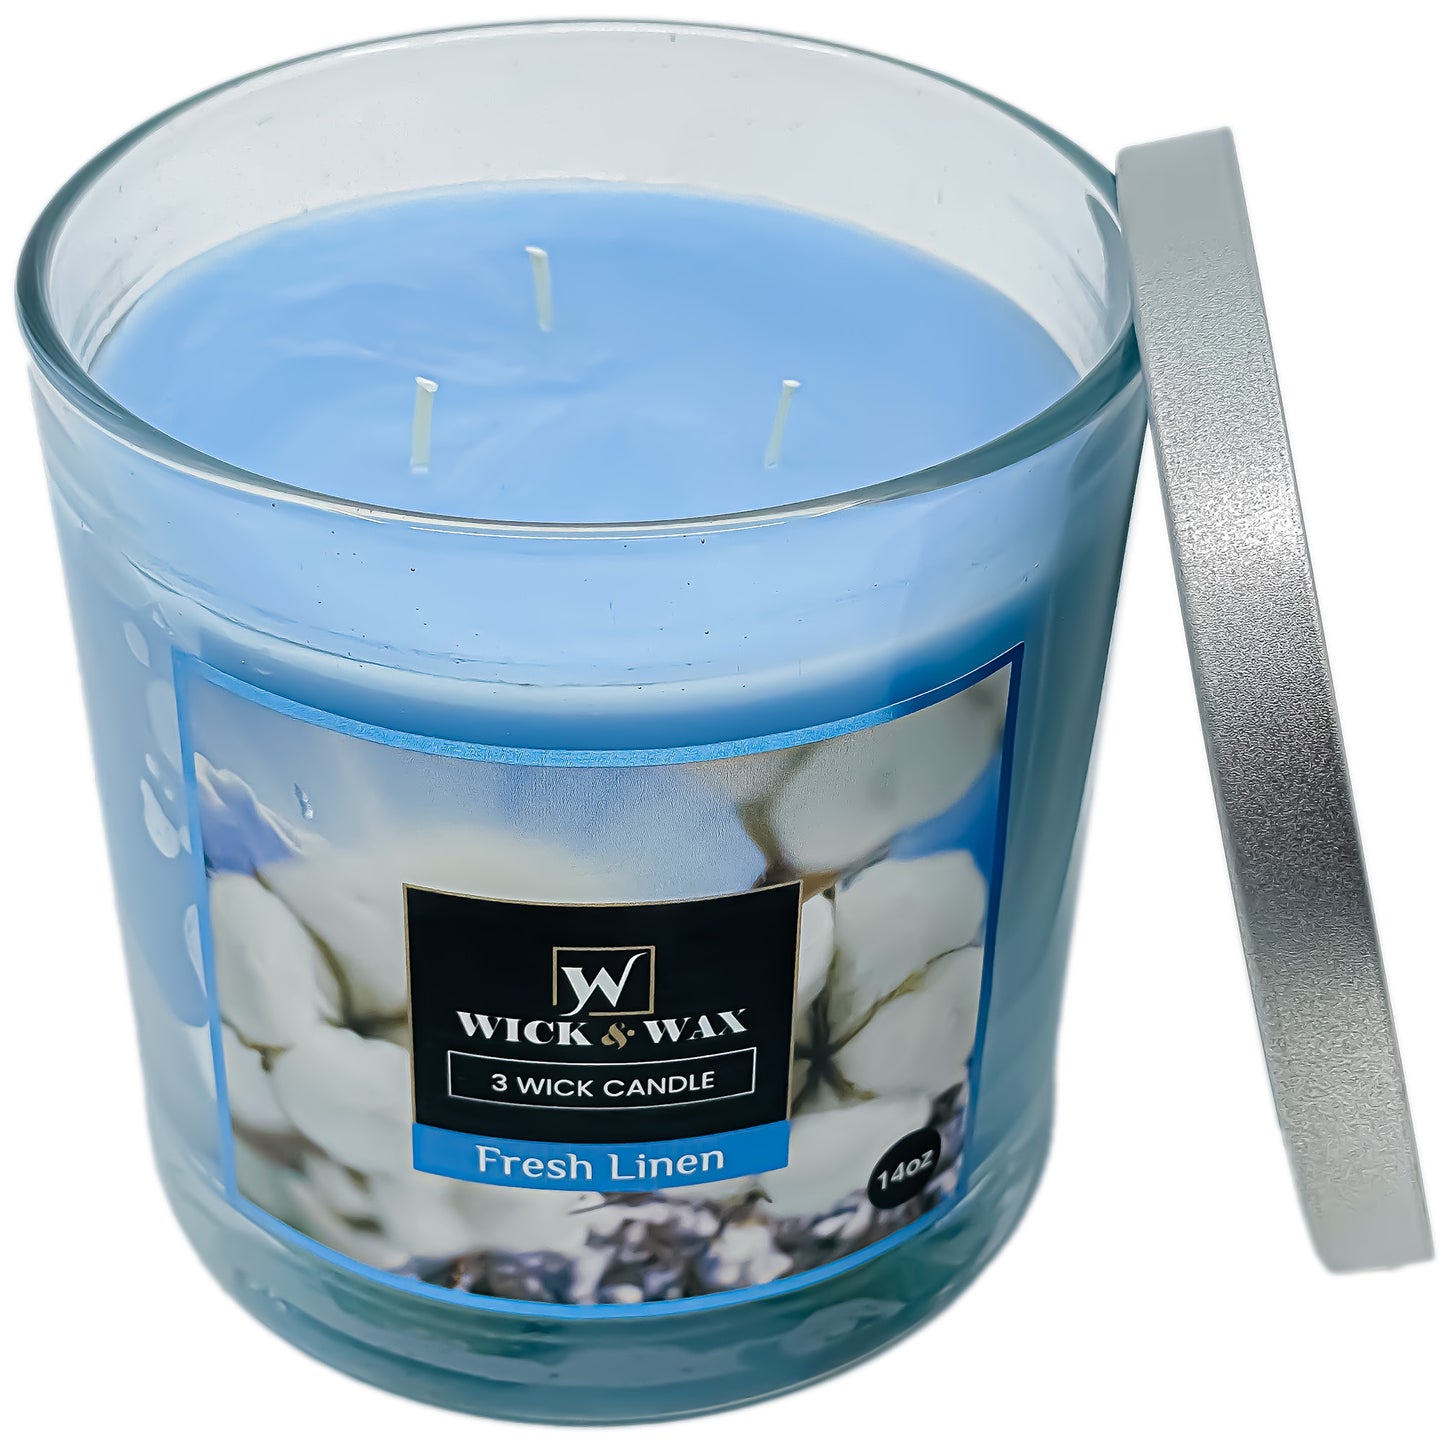 Fresh Linen Scented Jar Candle (3-wick) - 14oz.  WICK & WAX   